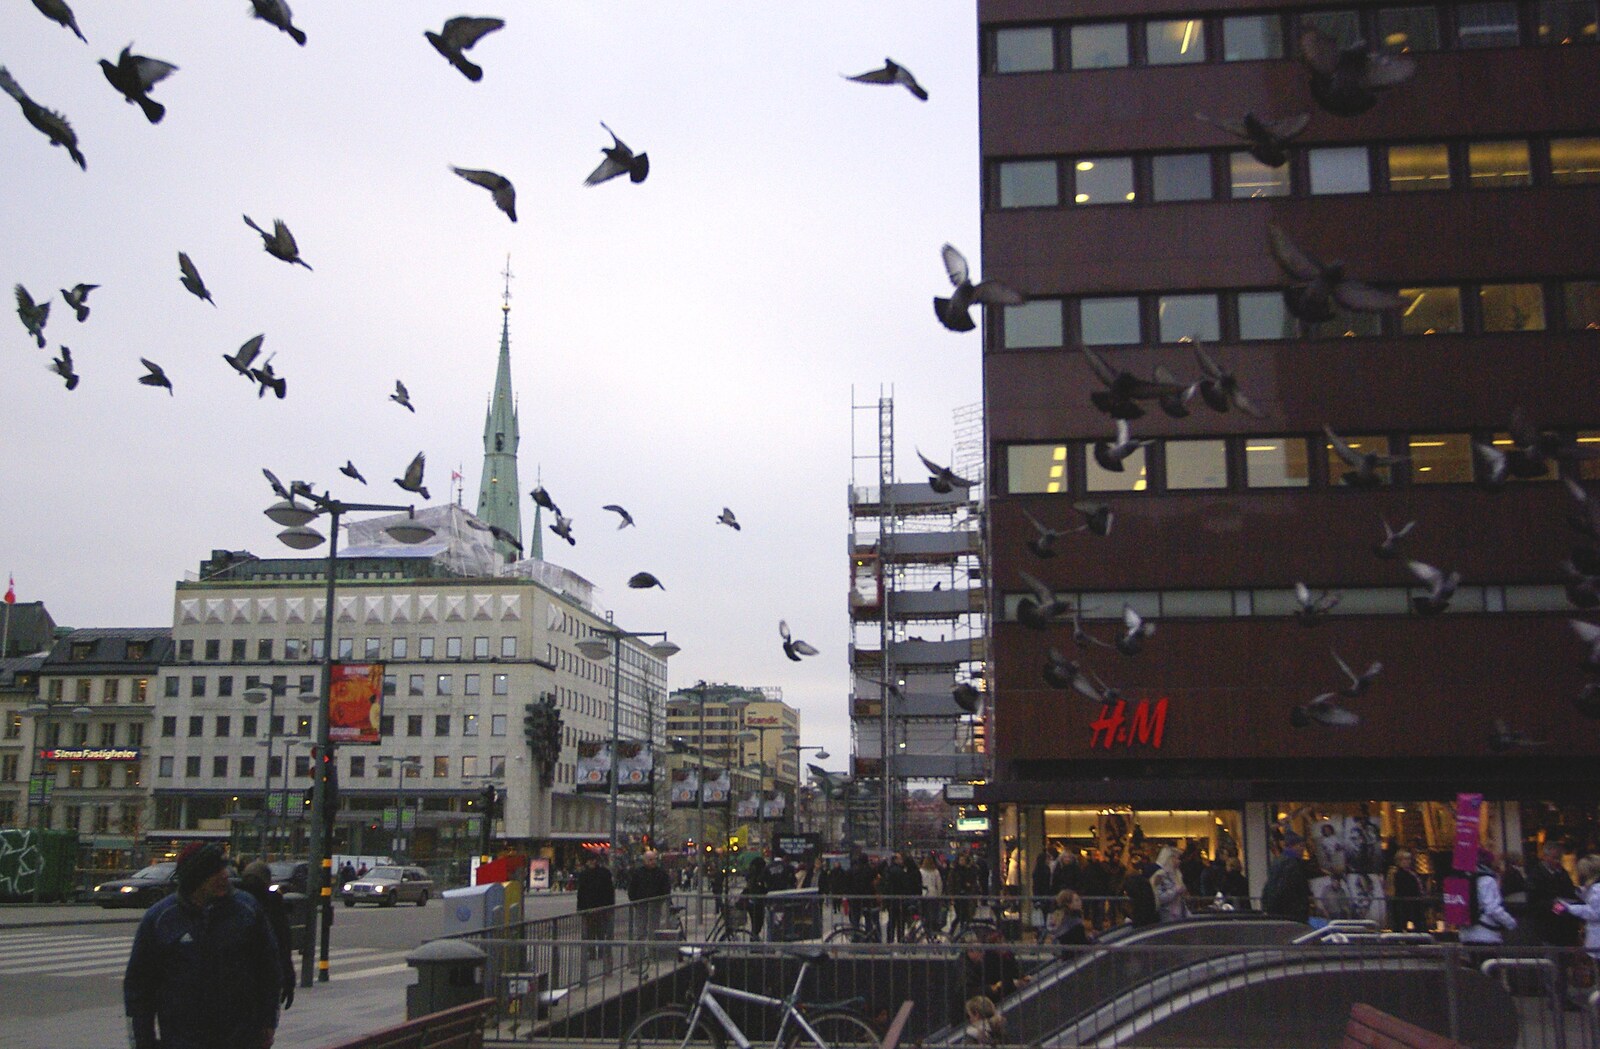 Pigeons take to the air from Gamla Stan, Stockholm, Sweden - 15th December 2007